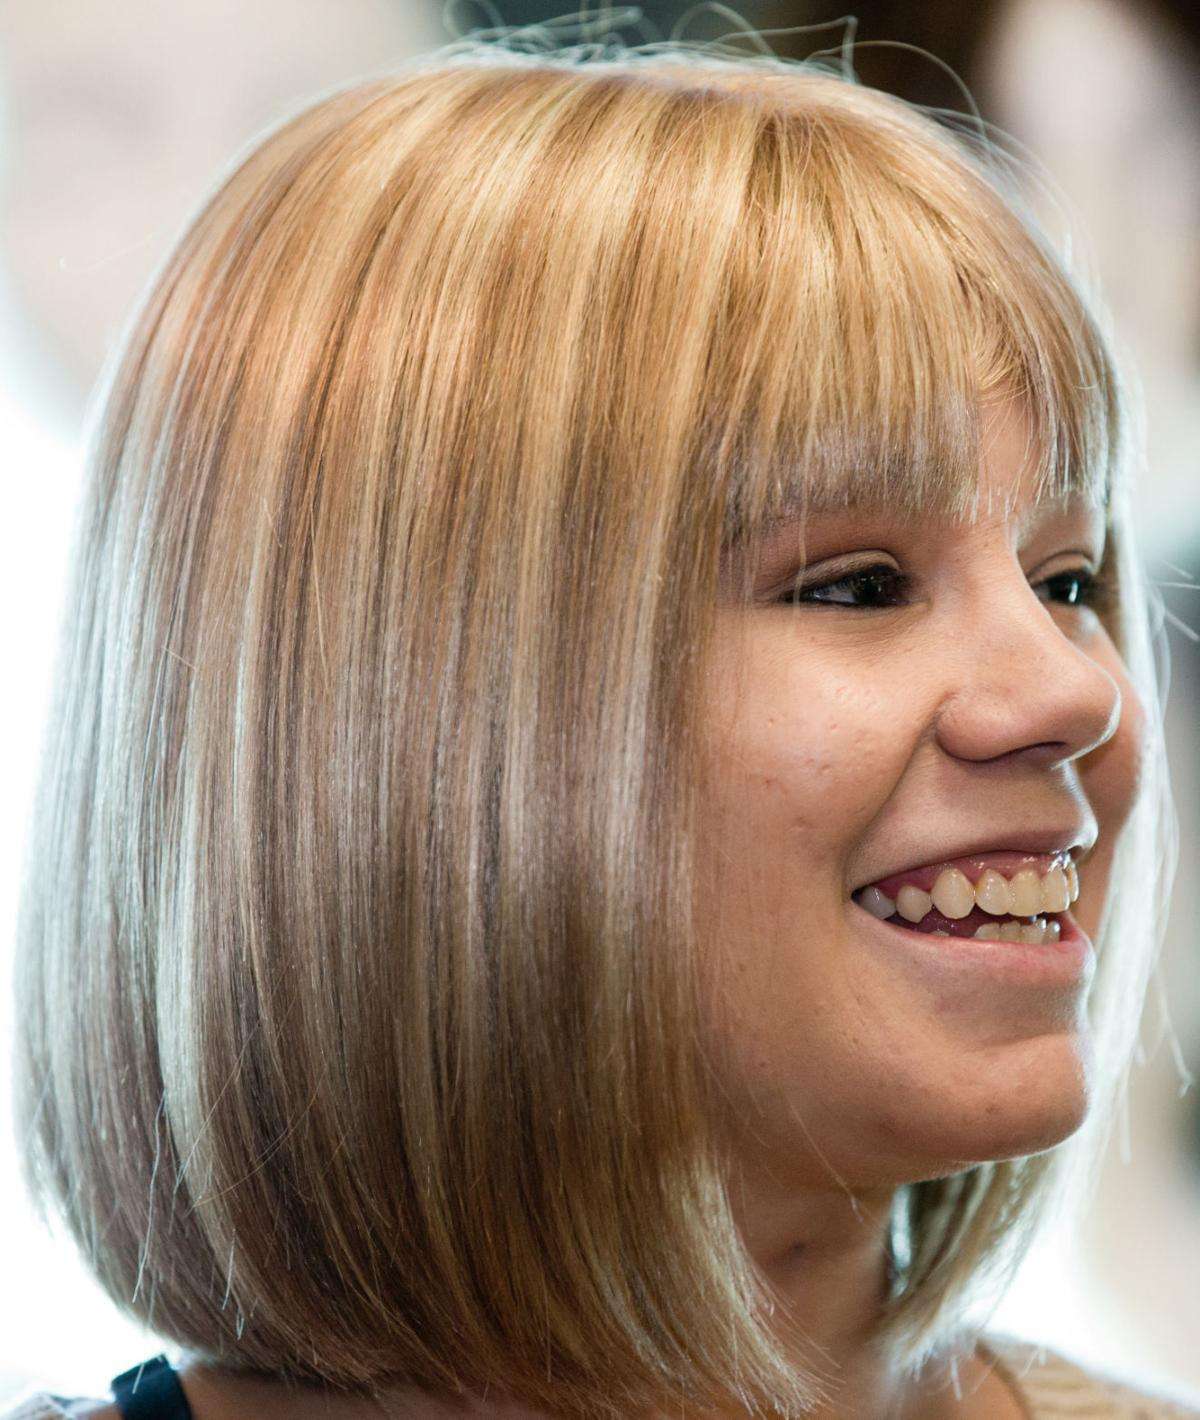 Omaha center gives free wigs to cancer patients, burn victims